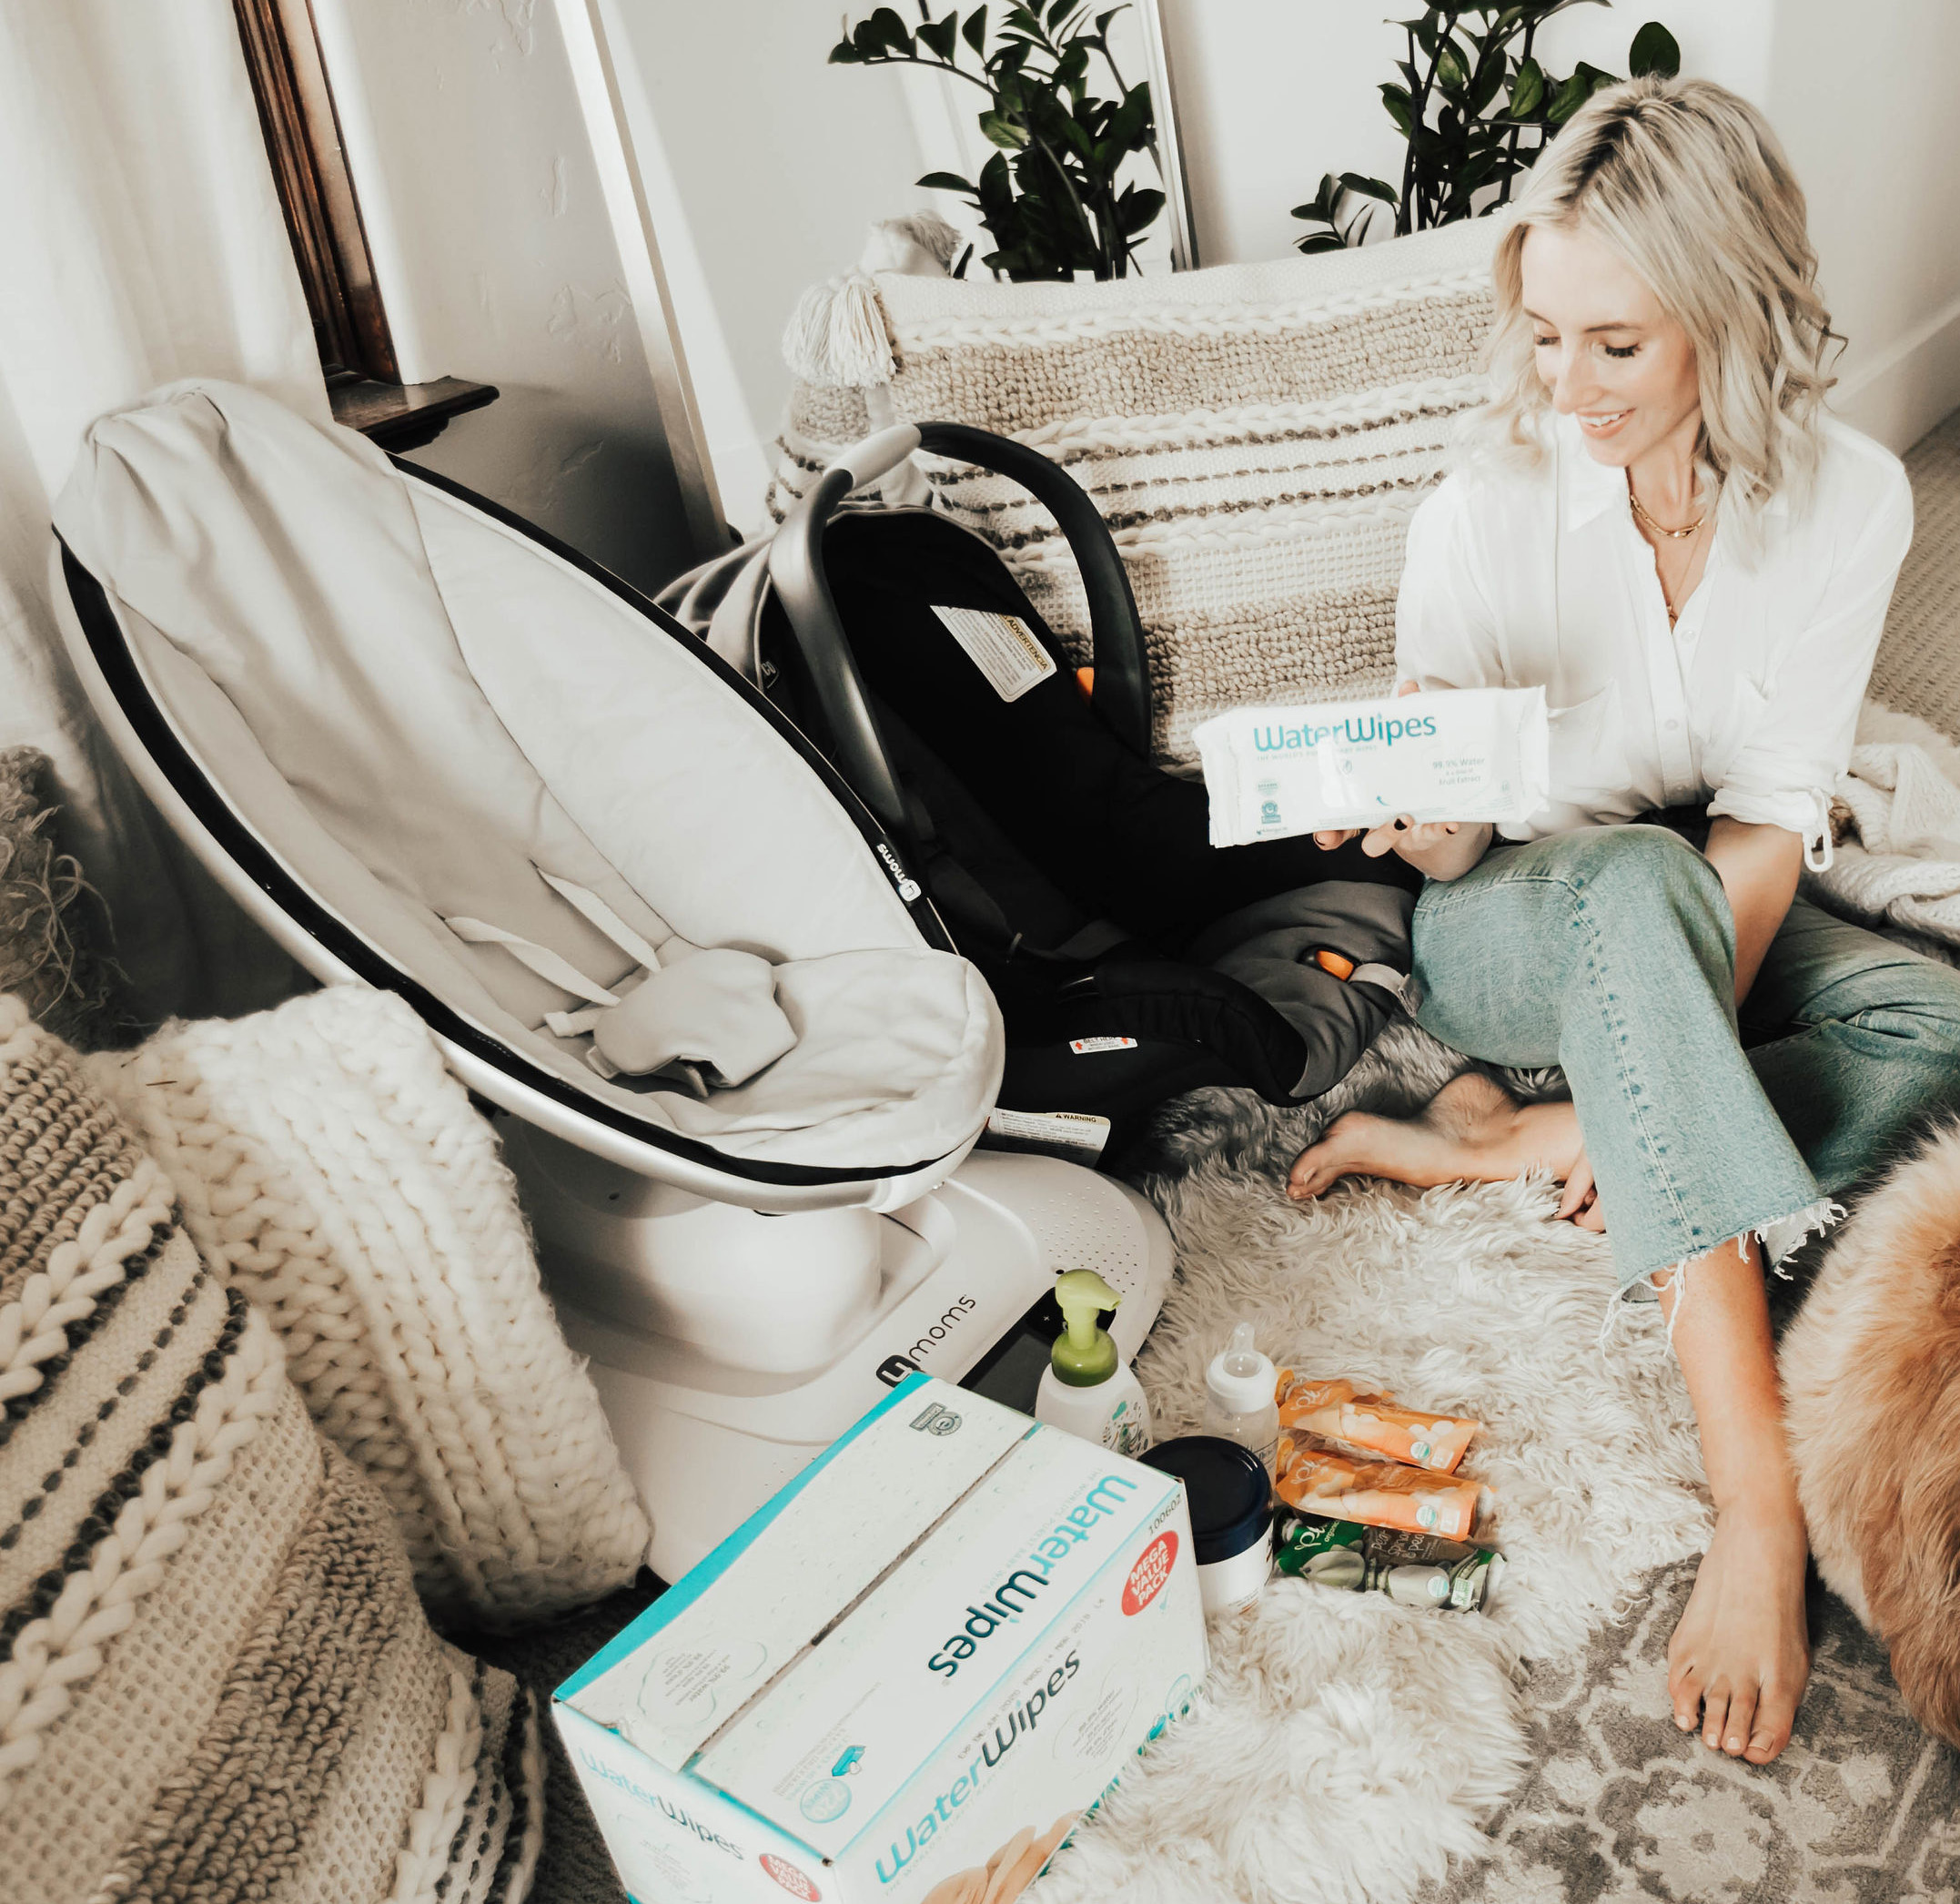 Emily Farren Wieczorek of Two Peas in a Prada shares all the best baby product savings going on right now at Wal Mart in Emily's Favorite Baby Products